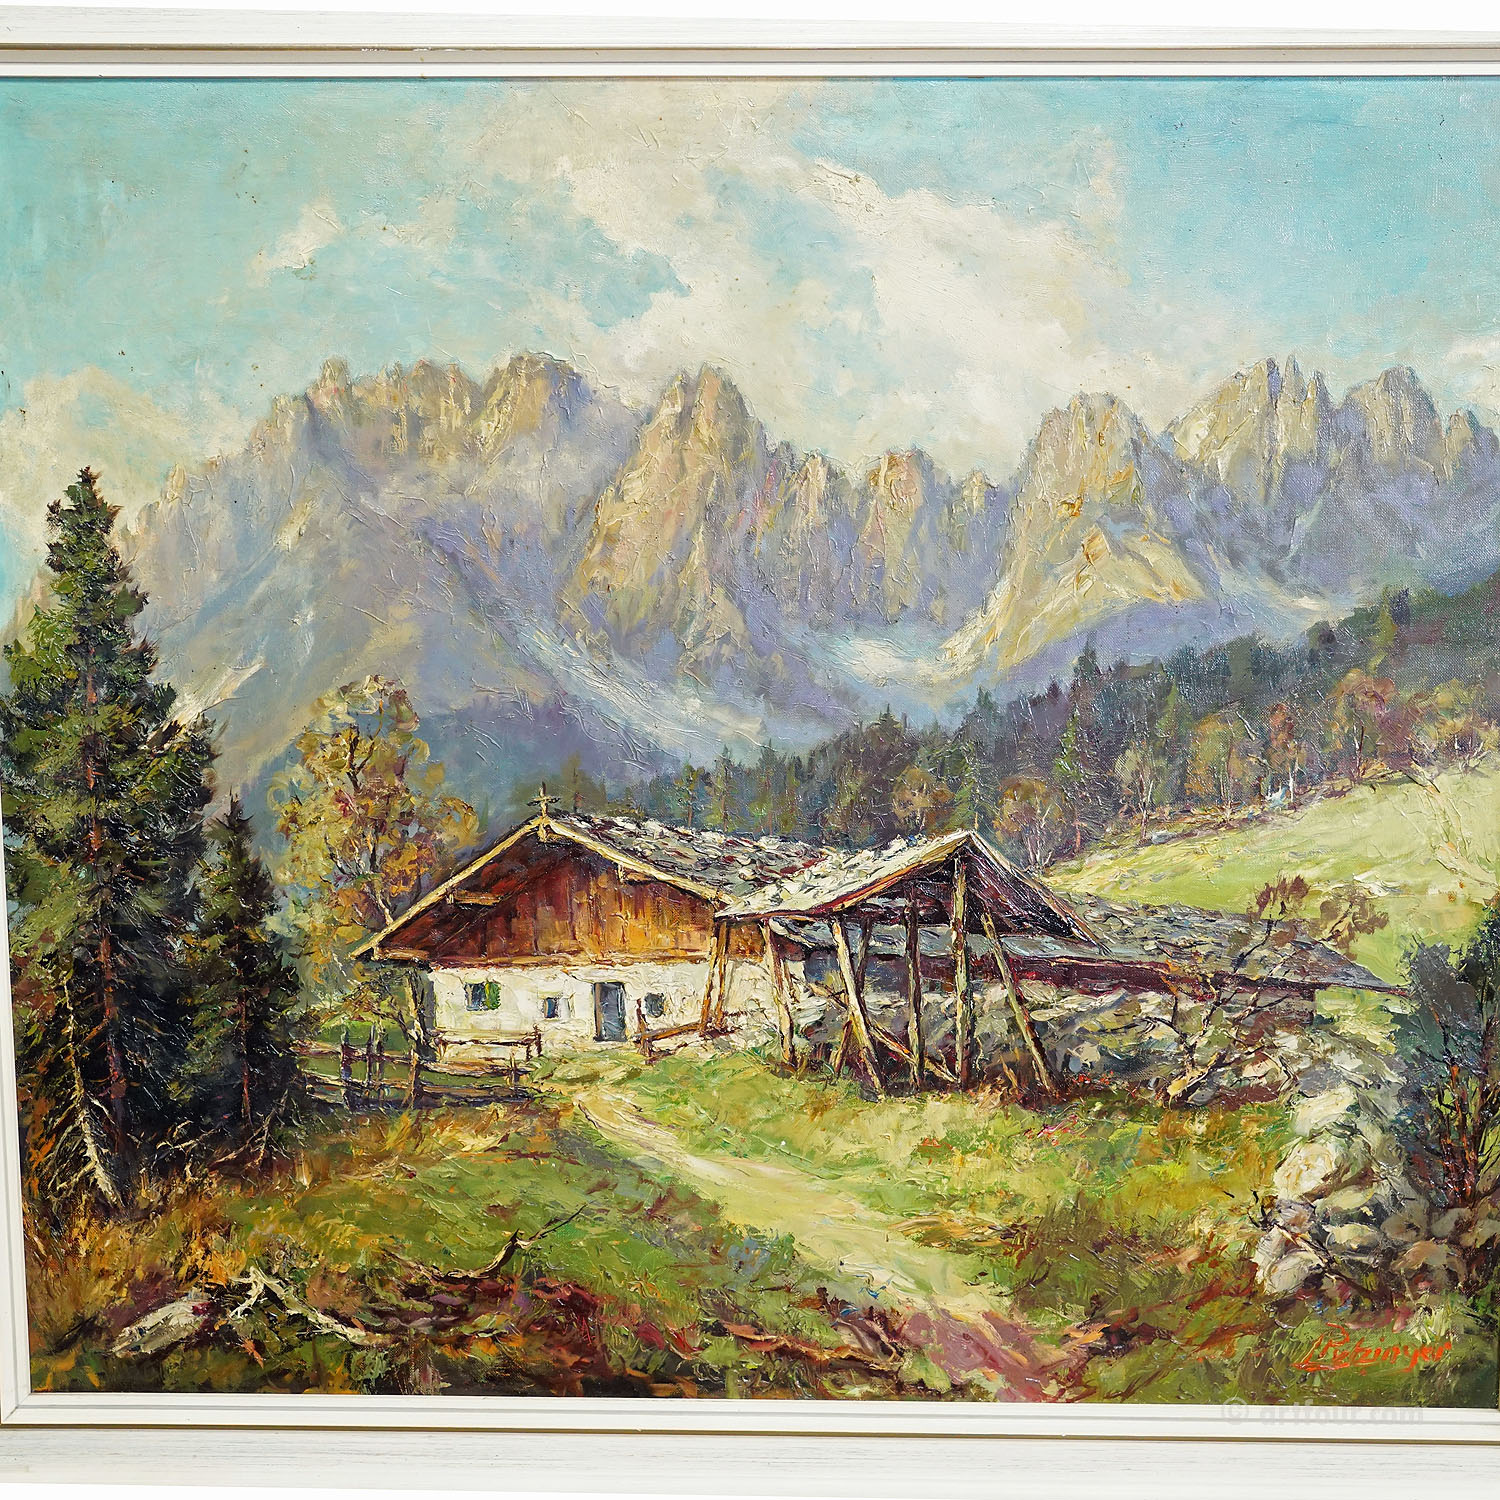 L. Putzinger - Summerly Mountain Landscape with Mountain Hut, Germany 1950s